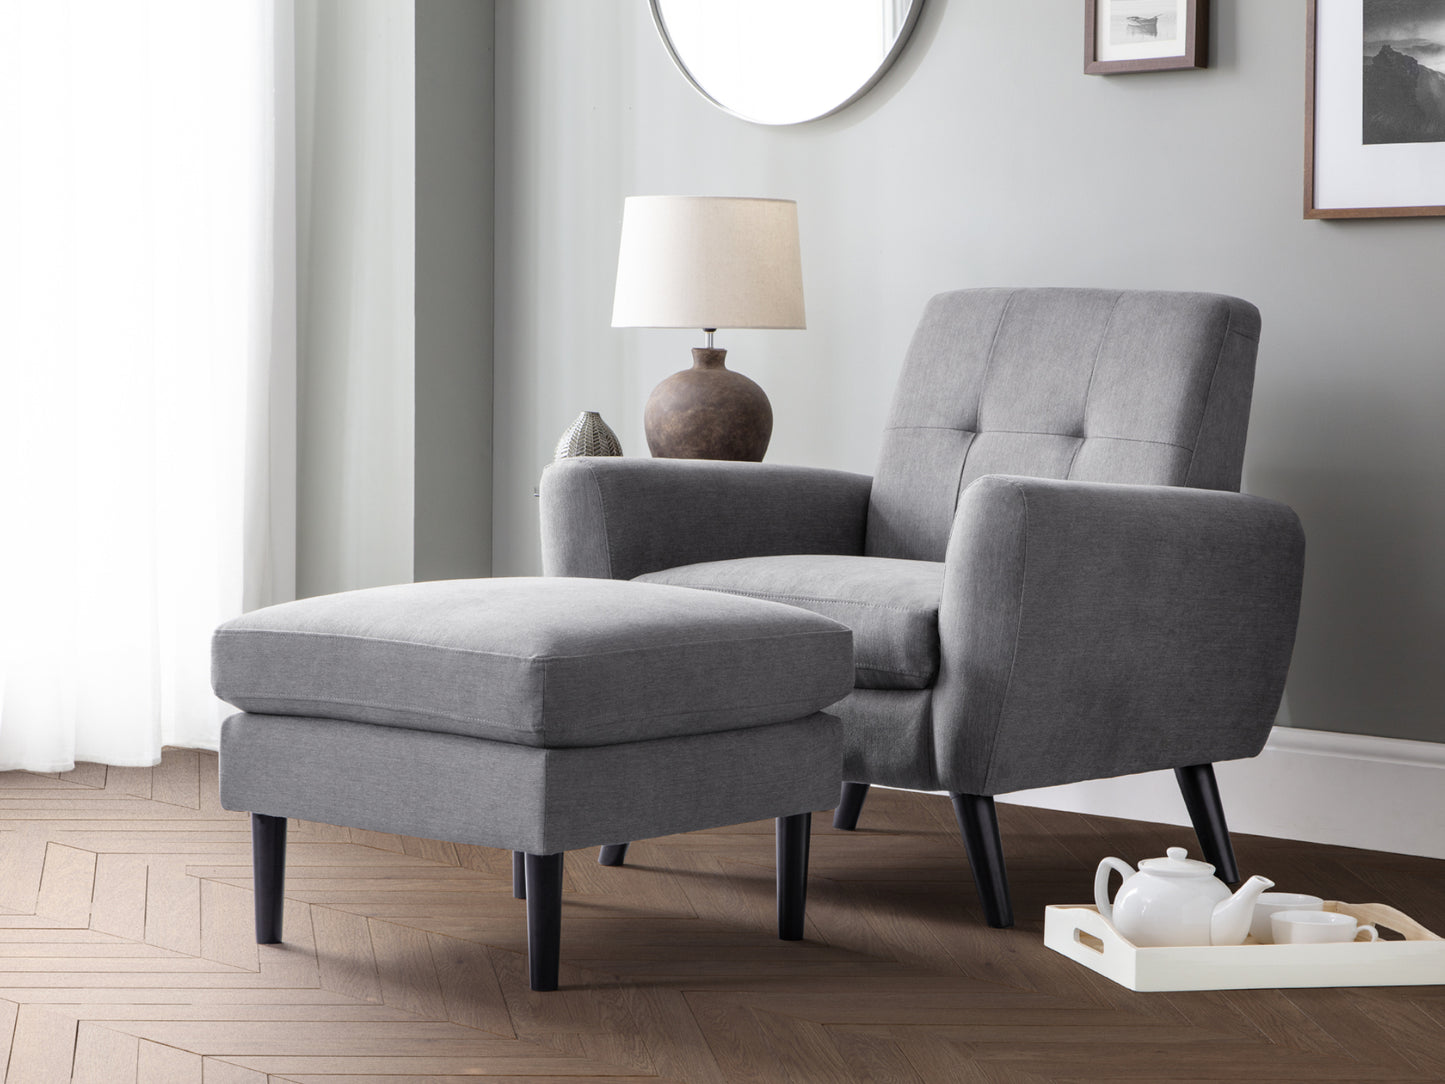 Monza Sofa and Sofa Bed in Grey Linen